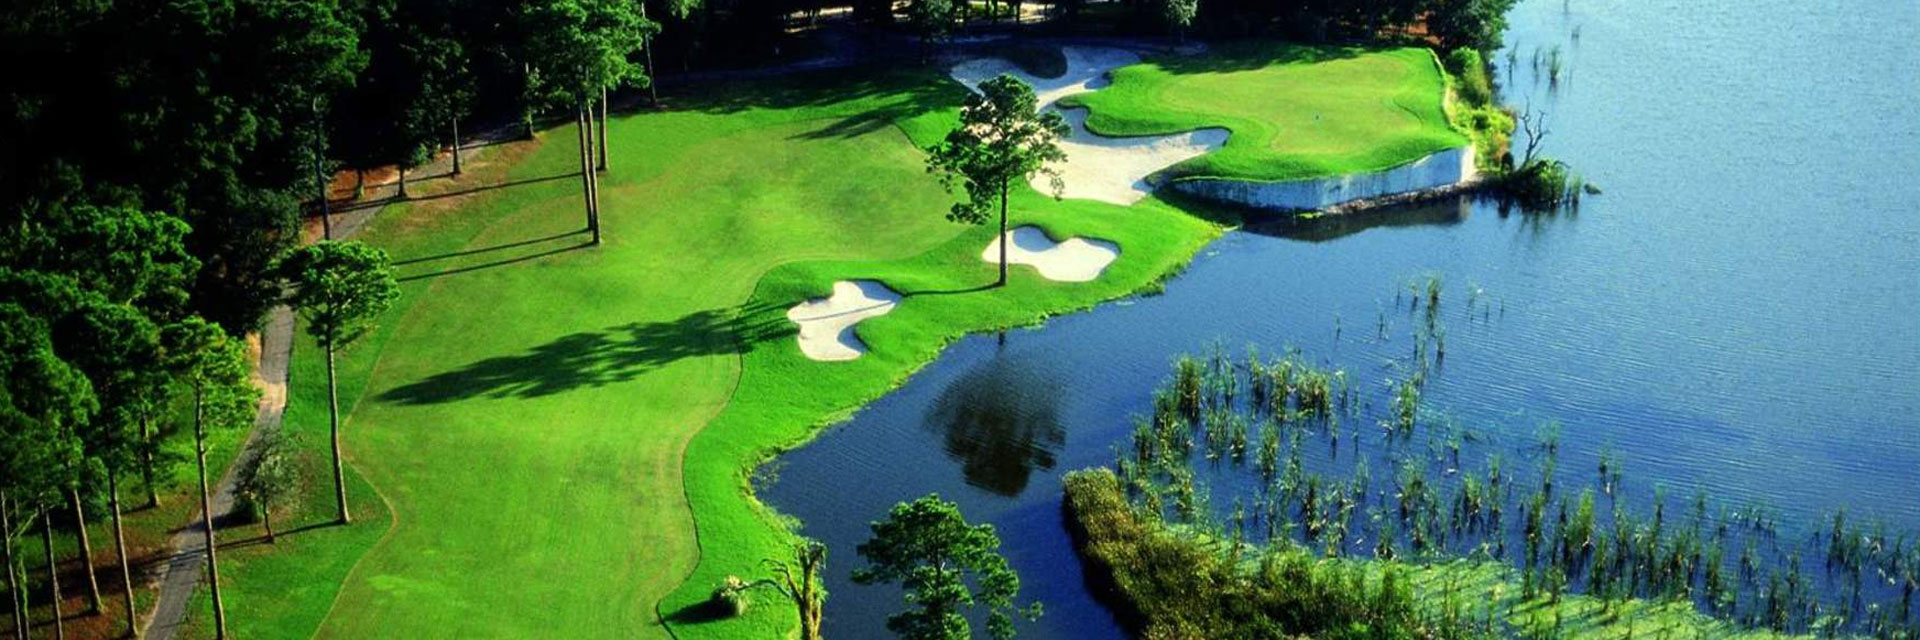 Myrtle Beach, SC Golf Package: Legends: Free Night, Free Round, Free Breakfast, Lunch, Beers - starting at $278 all in!